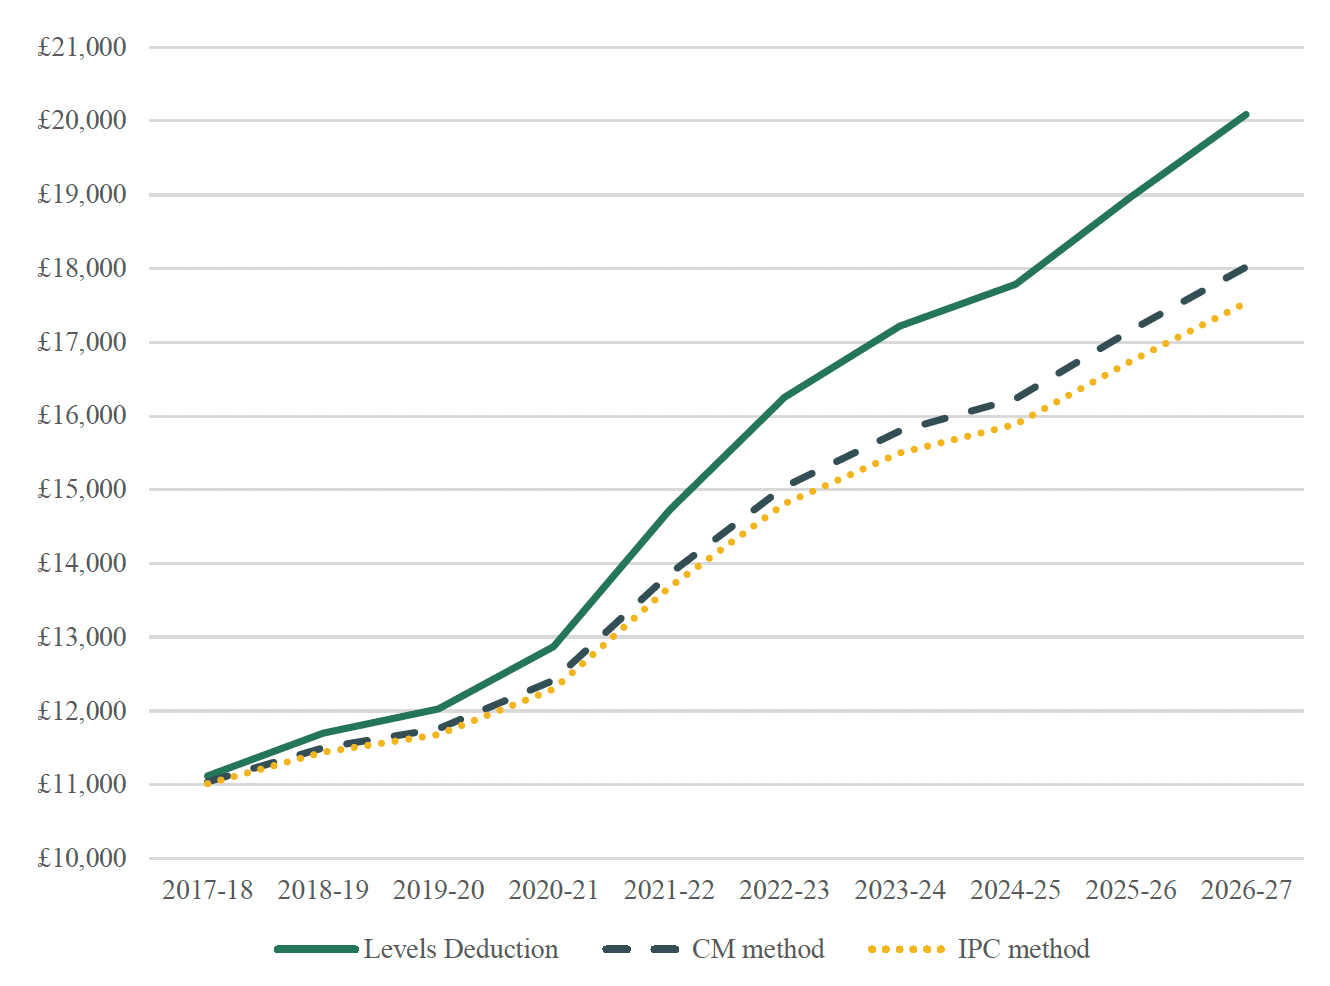 A graph showing a comparison of Income Tax BGAs under IPC, CM and Levels Deduction from 2017/18 to 2026/27. The graph has the years 2017/18 to 2026/27 along the top and figures from £10,000 to £21,000bn along the left side. A line represents each BGA in the graph. They all start at around £11,000bn in 2017/18. By 2026/27 Levels Deduction is at £20,000, CM at £18,000bn and IPC at around £17,500bn.